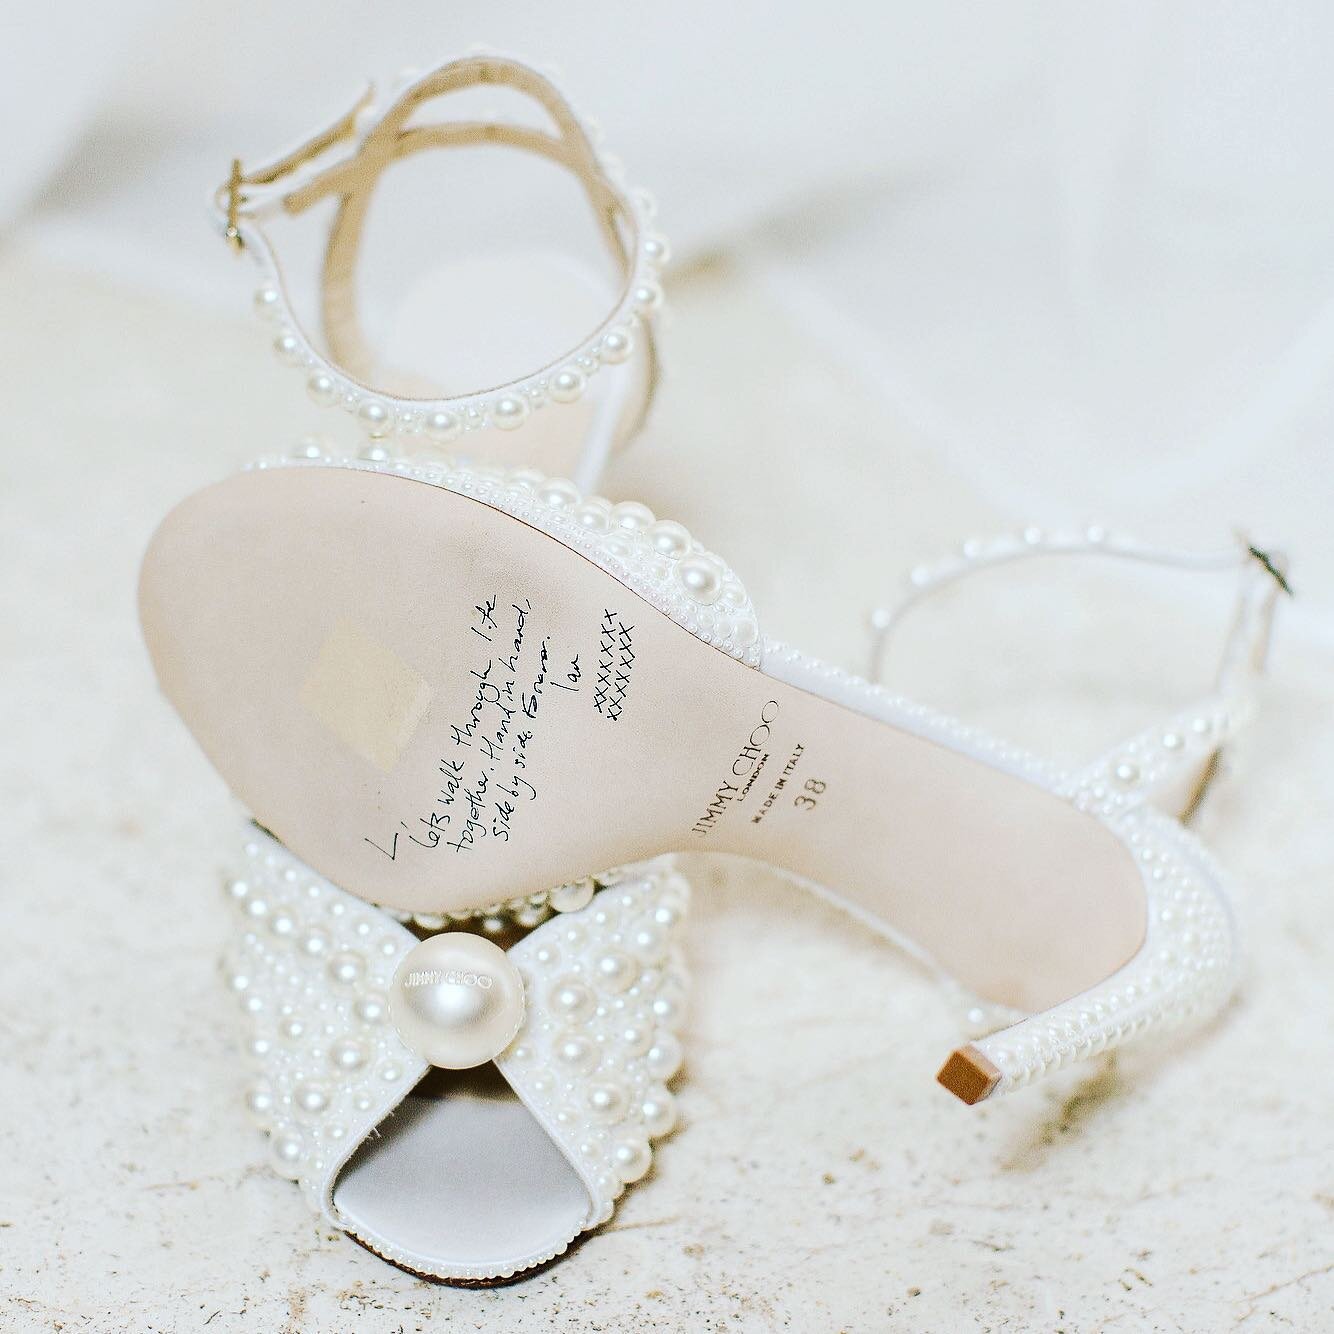 L,
Let&rsquo;s walk though life together. Hand in hand, side by side, forever. 
Ian xxxxx

Planning &amp; design @lucy_till_french_weddings 
Photography @studio_aq 
Shoes @jimmychoo 

#bridesshoes #brideshoes #luxuryweddings #bridalshoes #bridalinspo